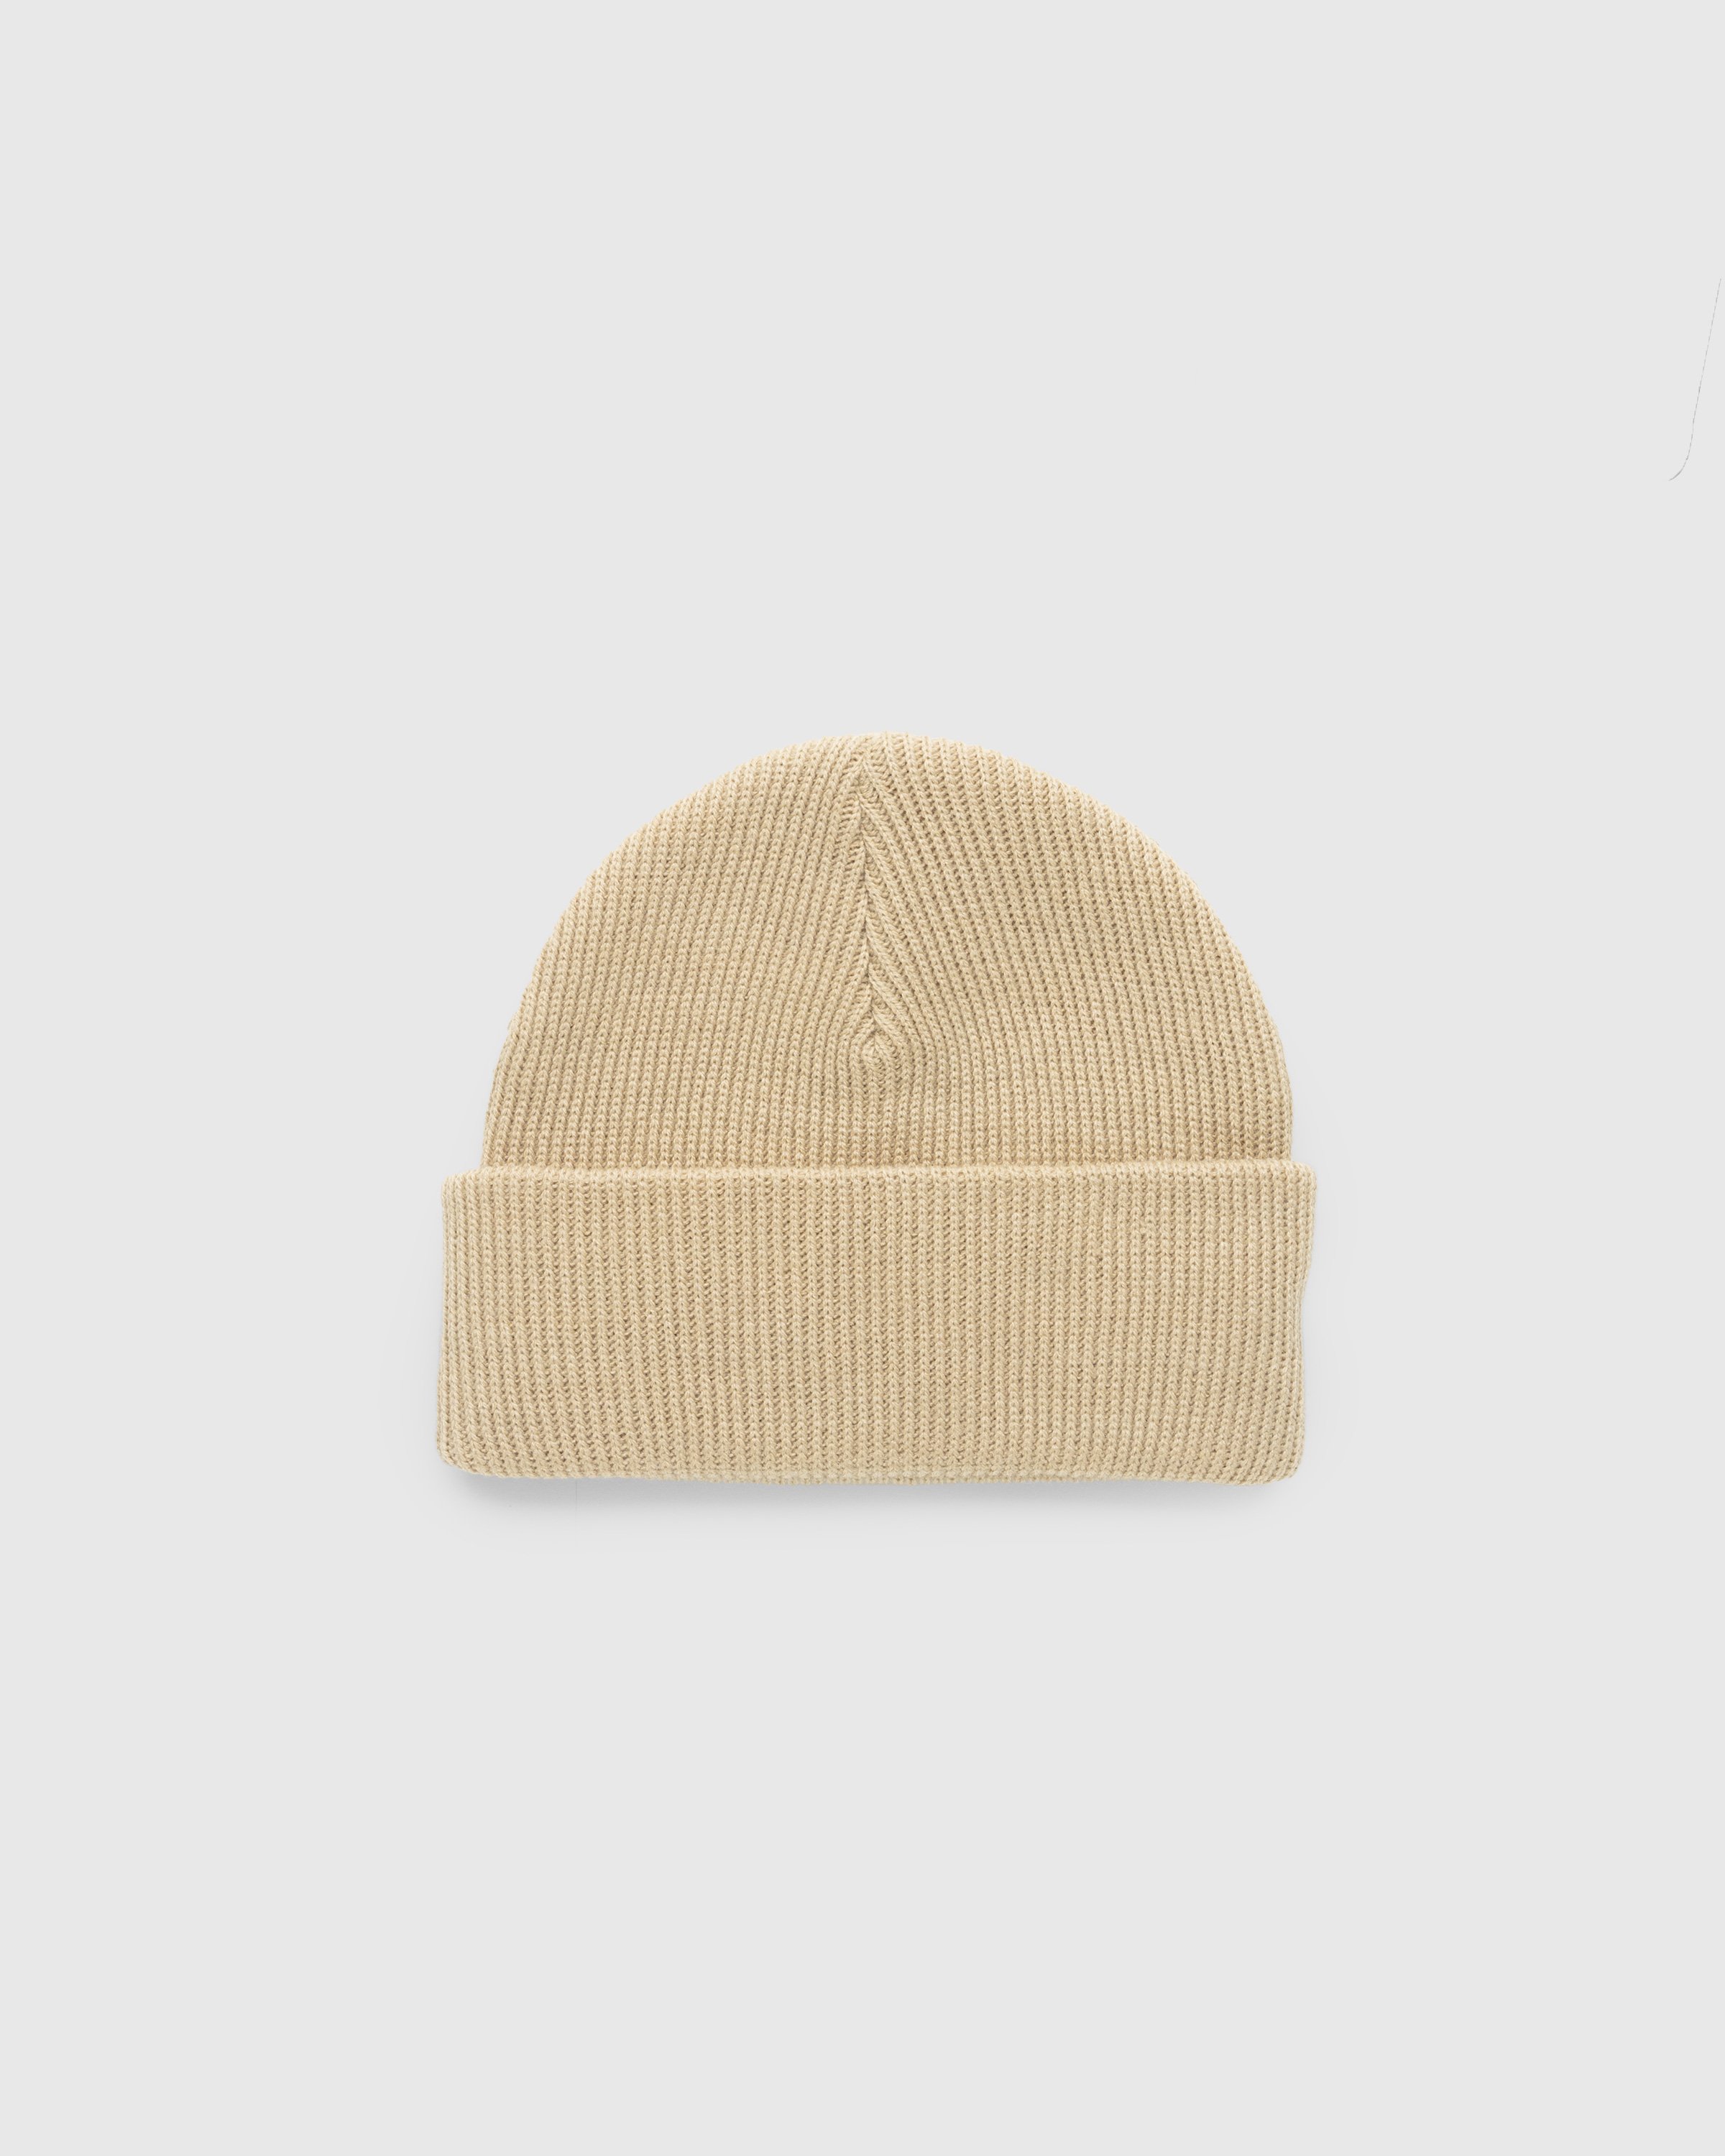 Carhartt WIP - Heart Patch Beanie Brown - Accessories - Brown - Image 2